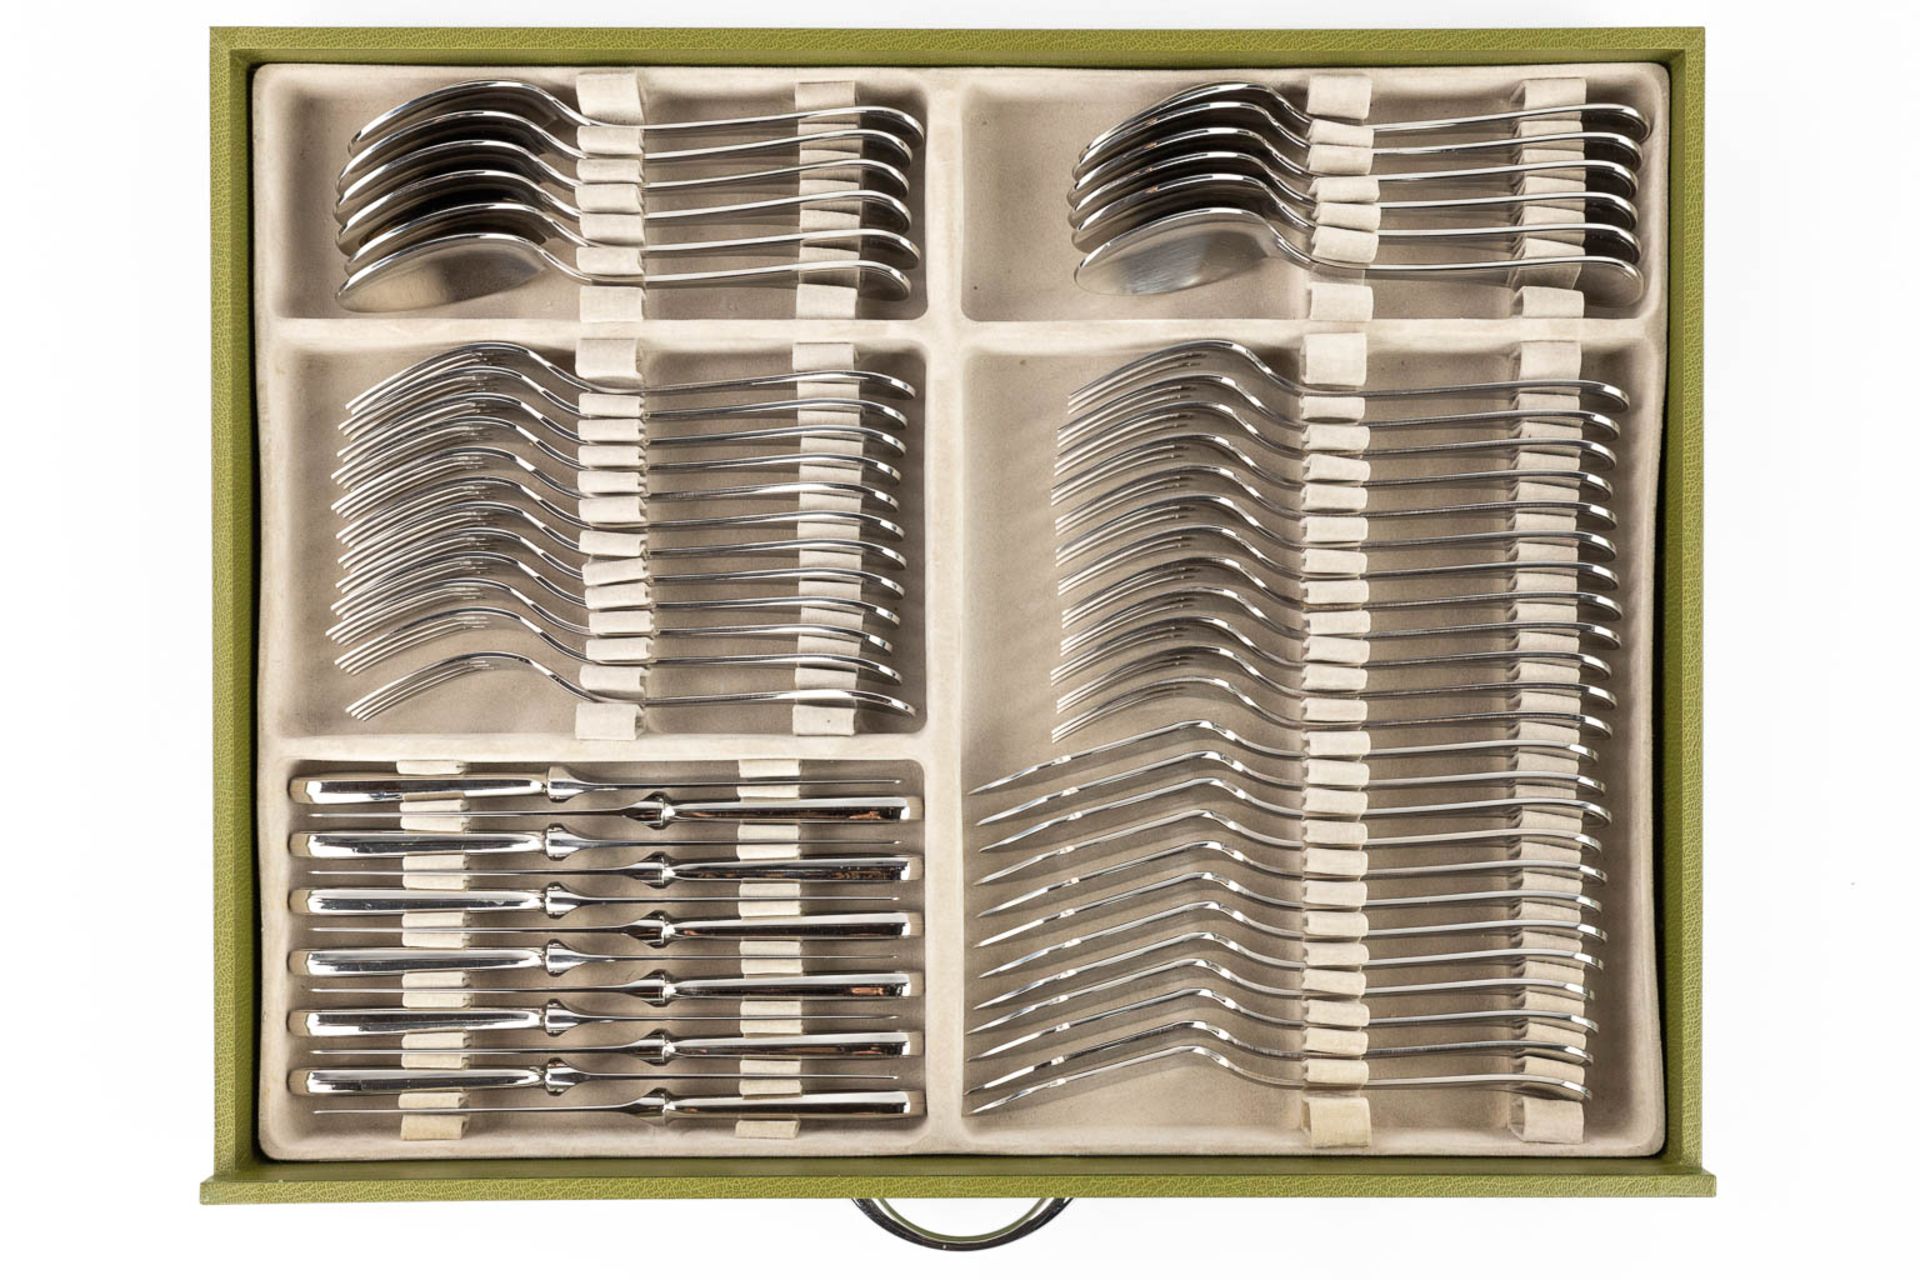 Christofle, model 'Albi' in an 'ambassador 125' case, a 124-piece flatware set, stainless steel. (L - Image 8 of 12